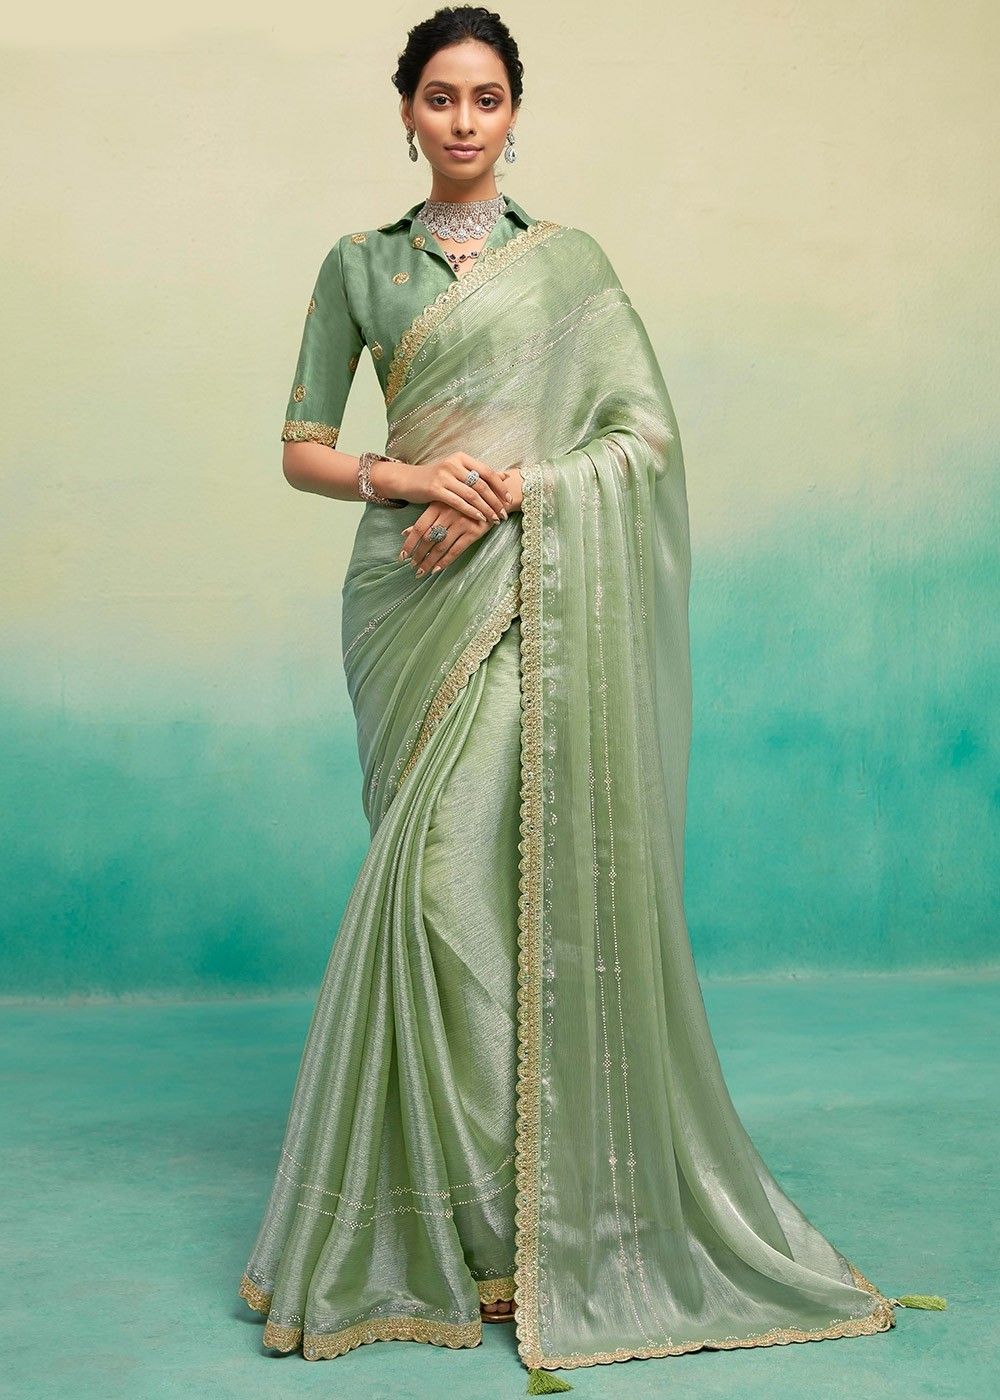 Indian Wedding Saree - Pretty In #Pastels- the #Colours of the Season! Shop  in #SALE for this Pastel #Blue #Saree with #Golden #Embroidery & Stone  Work~ Check Price Here: http://bit.ly/1LwIvT7 #sarees #sari #